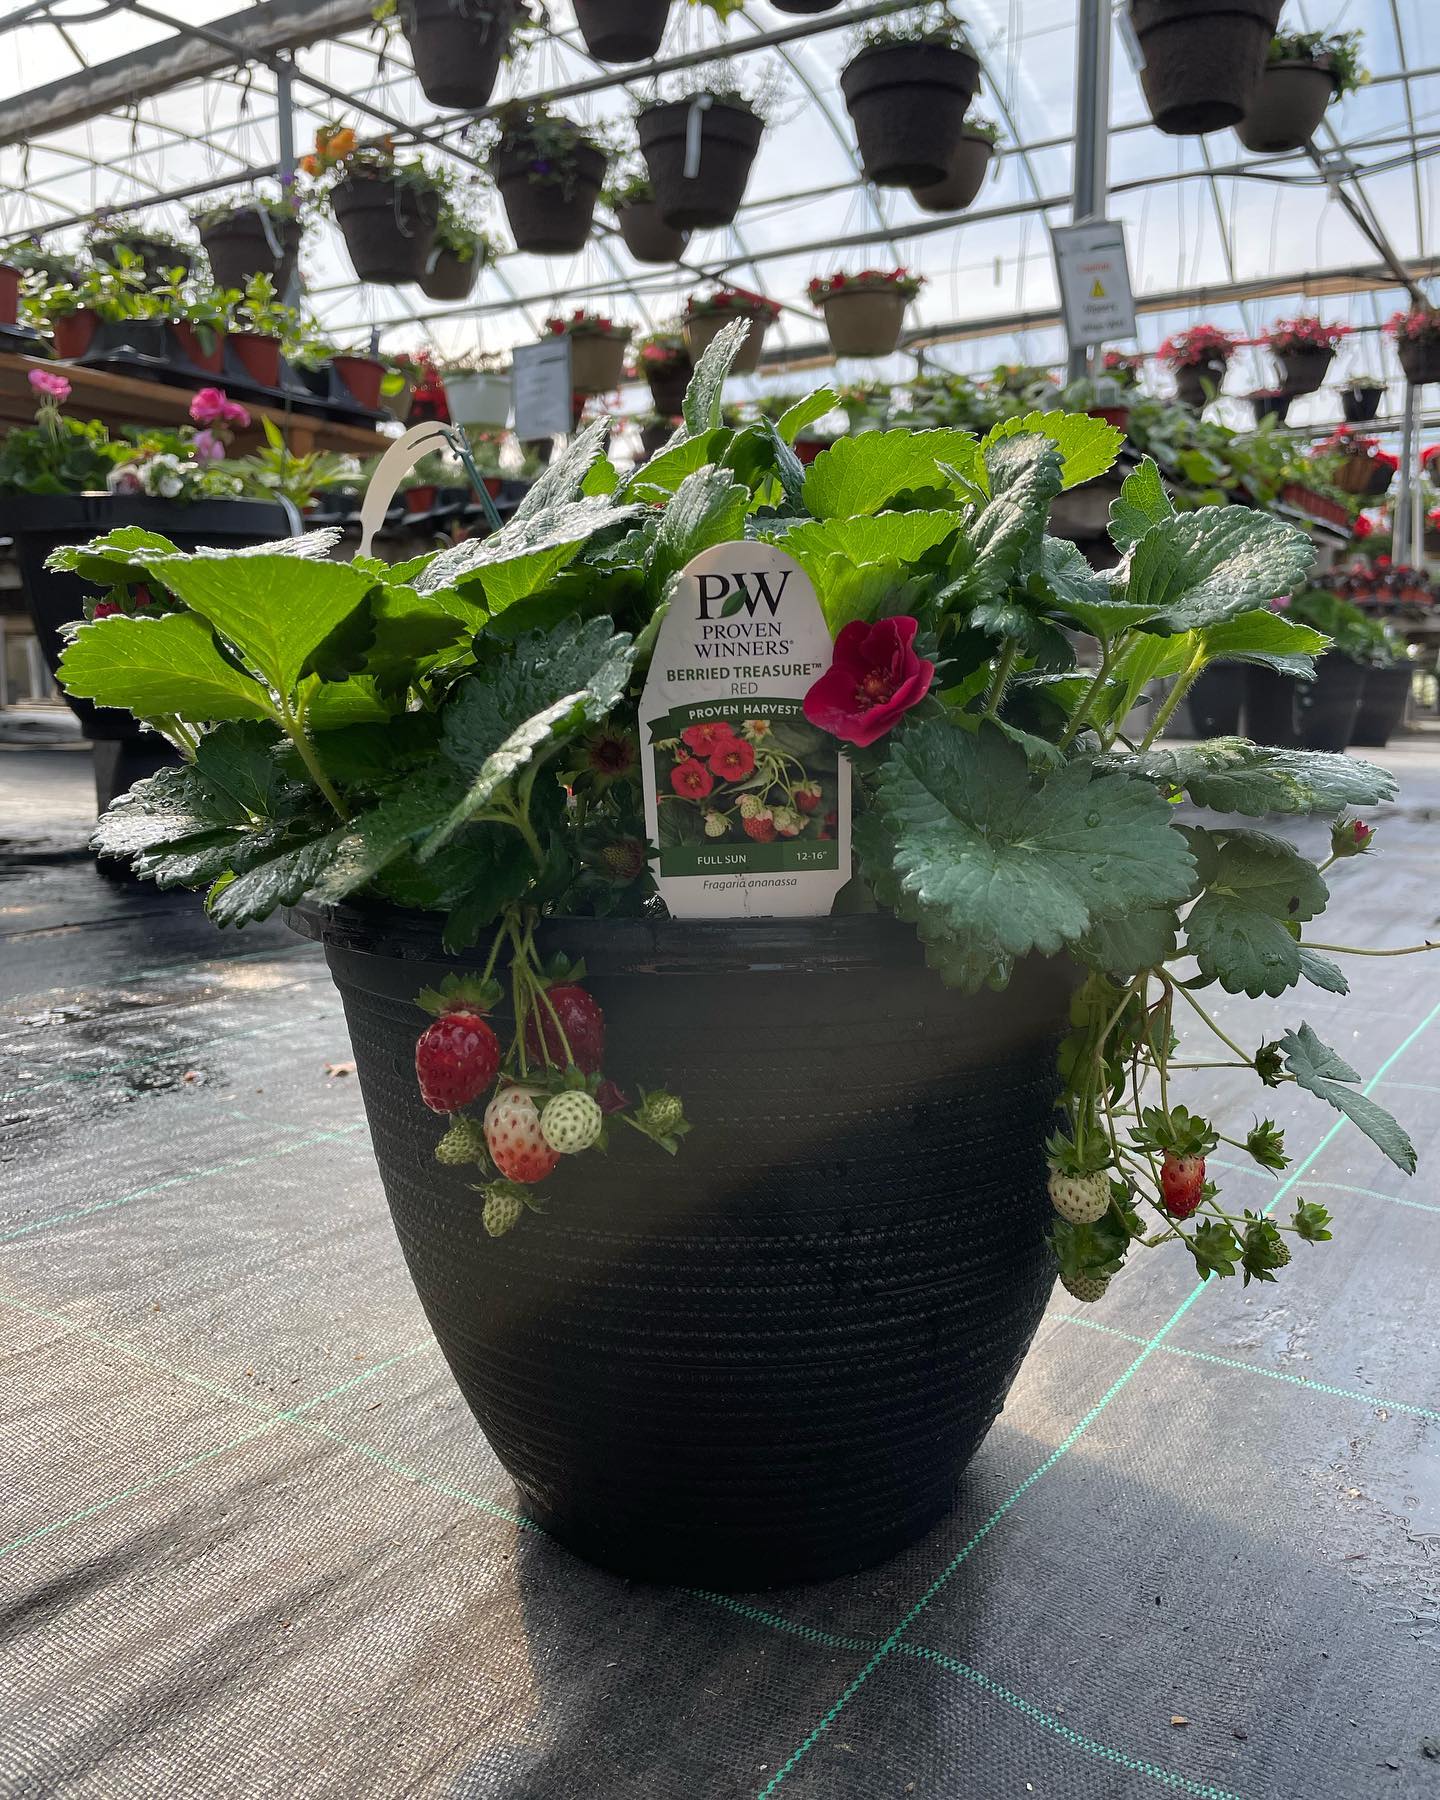 Proven Winners Strawberry patio pot with hanging baskets cascading in the garden center background